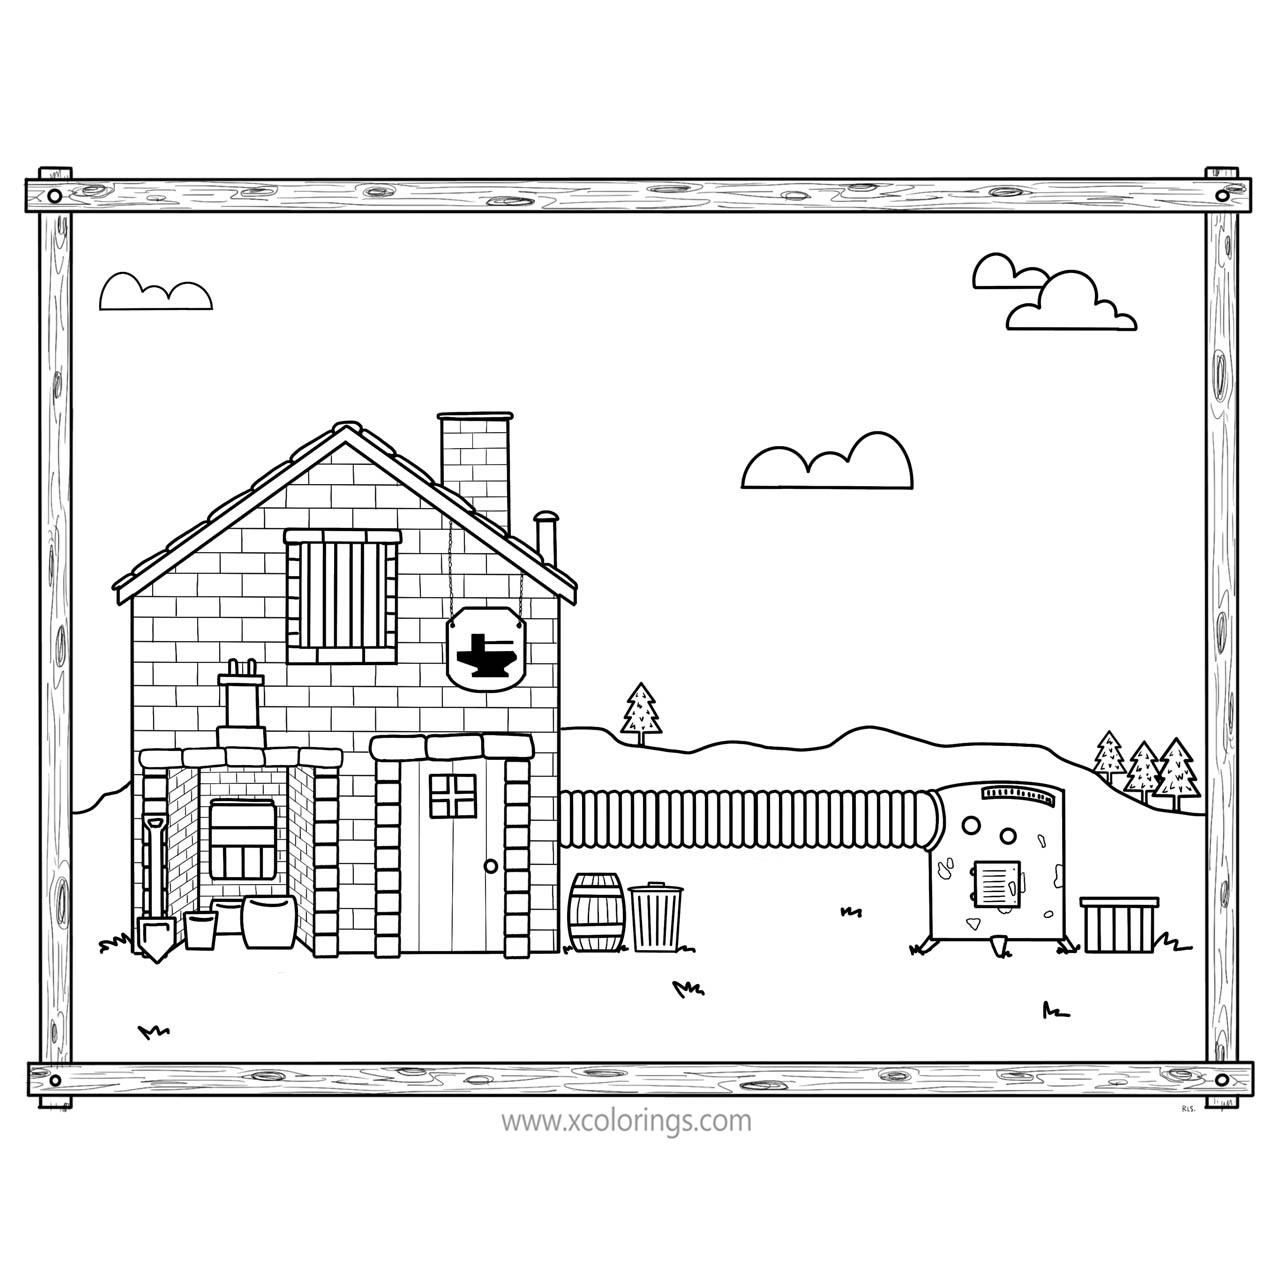 Free Stardew Valley Coloring Pages Artword by RobynSmith printable